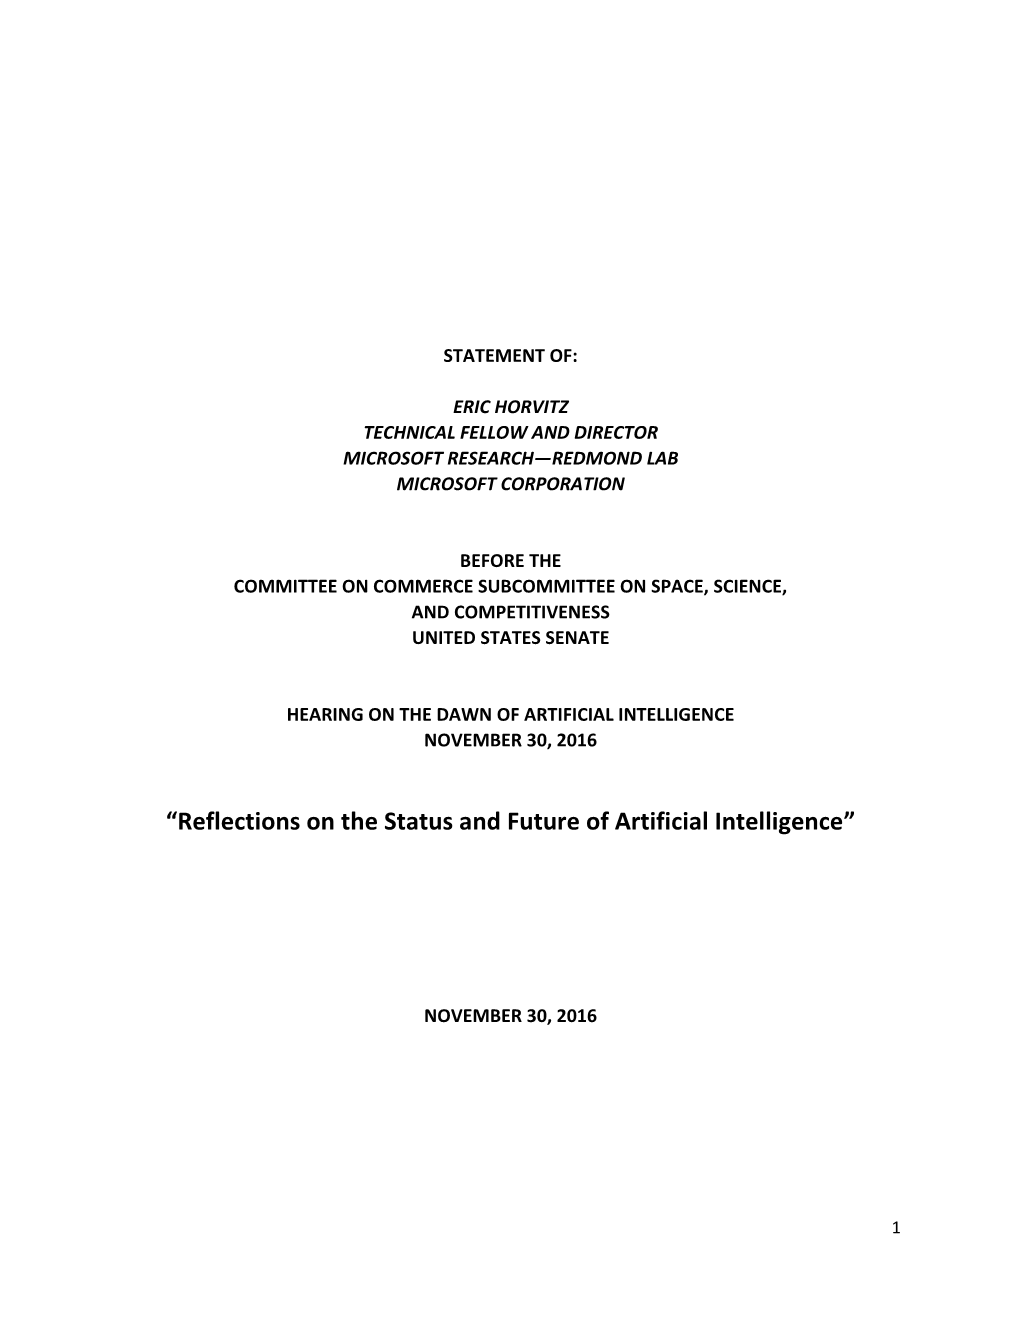 “Reflections on the Status and Future of Artificial Intelligence”